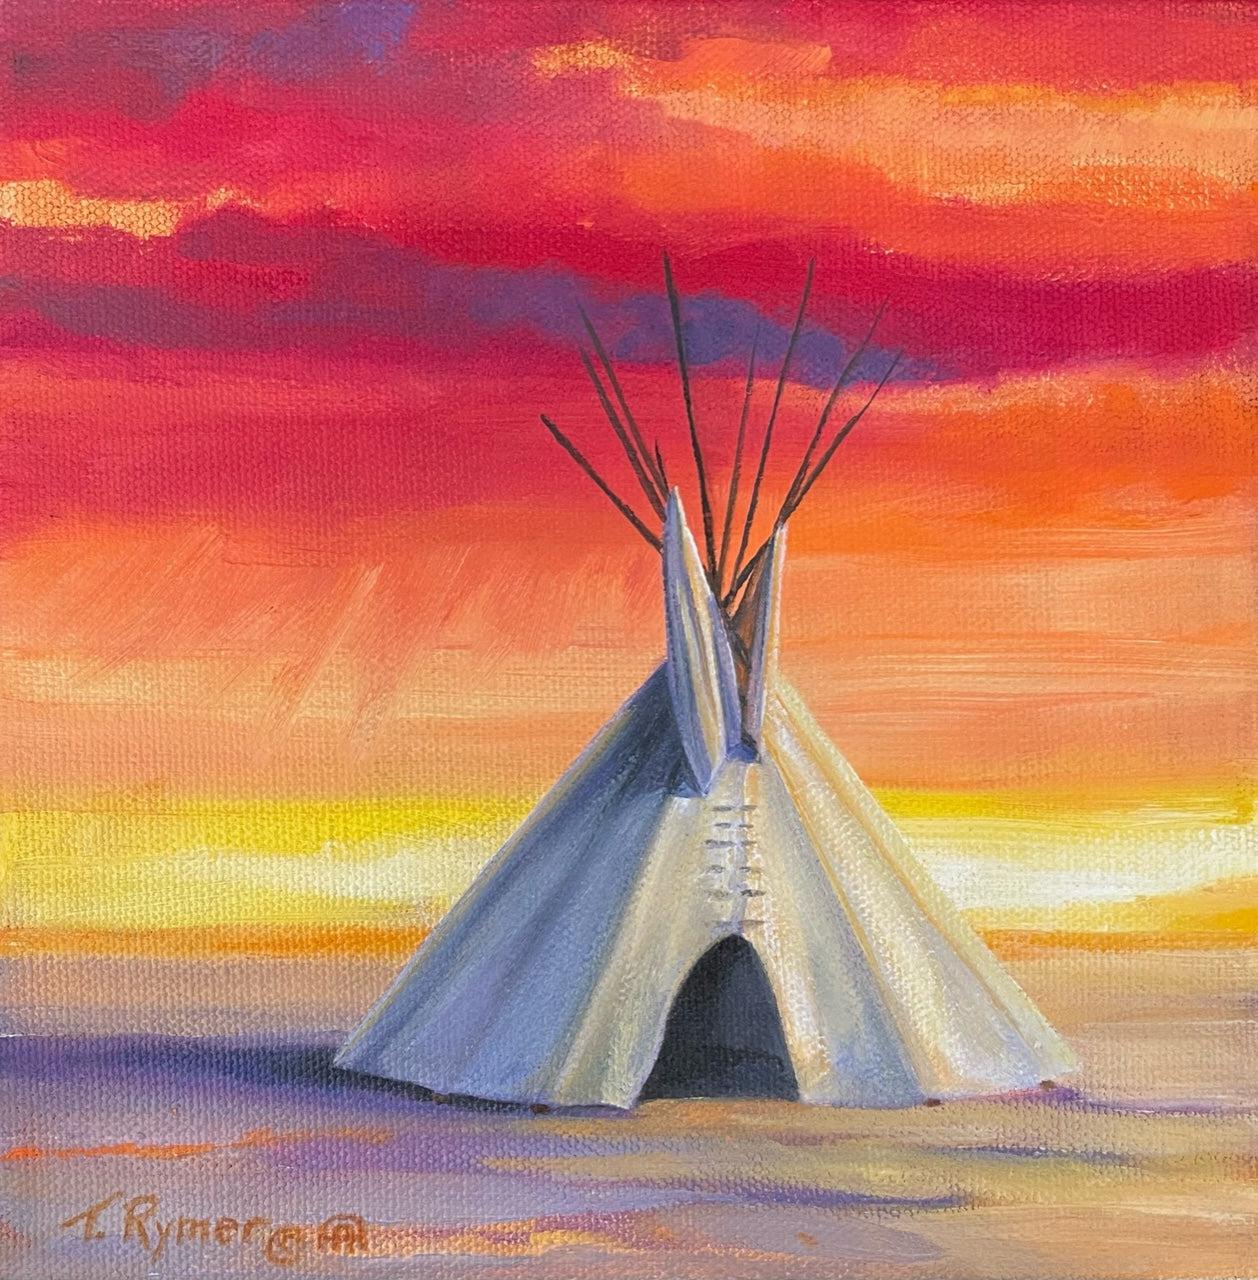 They Spent the Summer-Painting-Tamara Rymer-Sorrel Sky Gallery